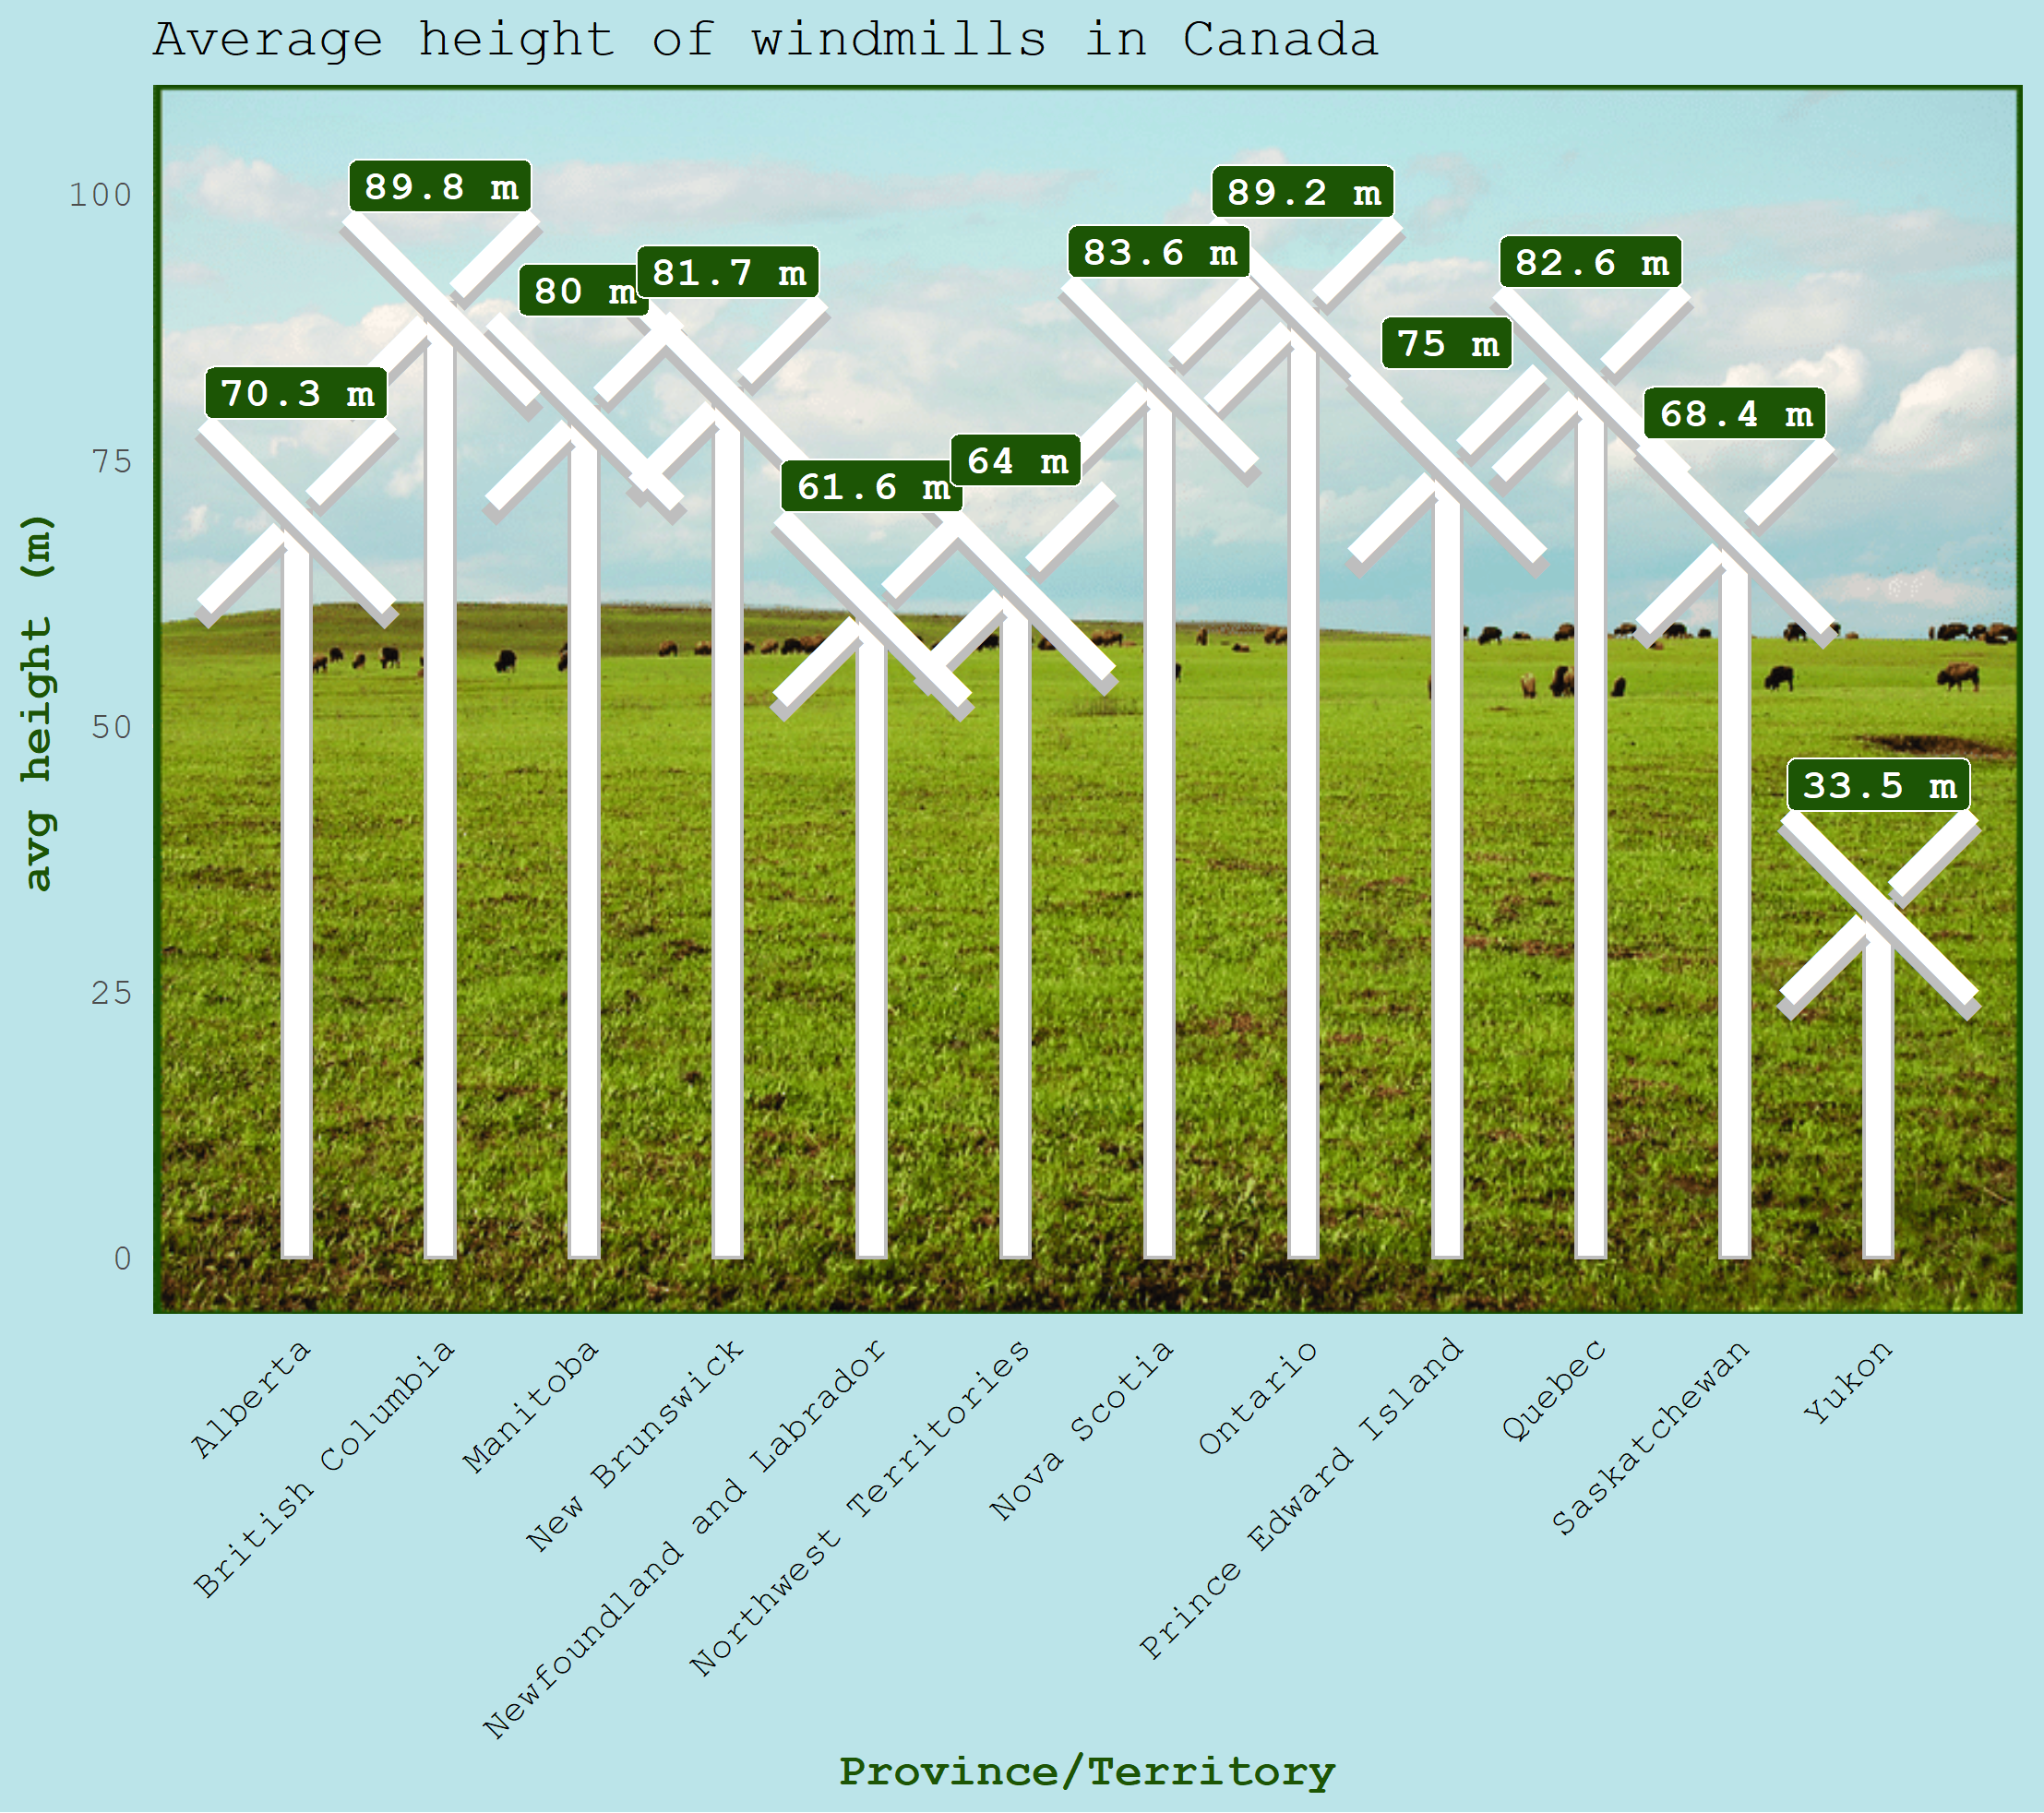 bar chart showing the average windmill heights in the different provinces of Canada 